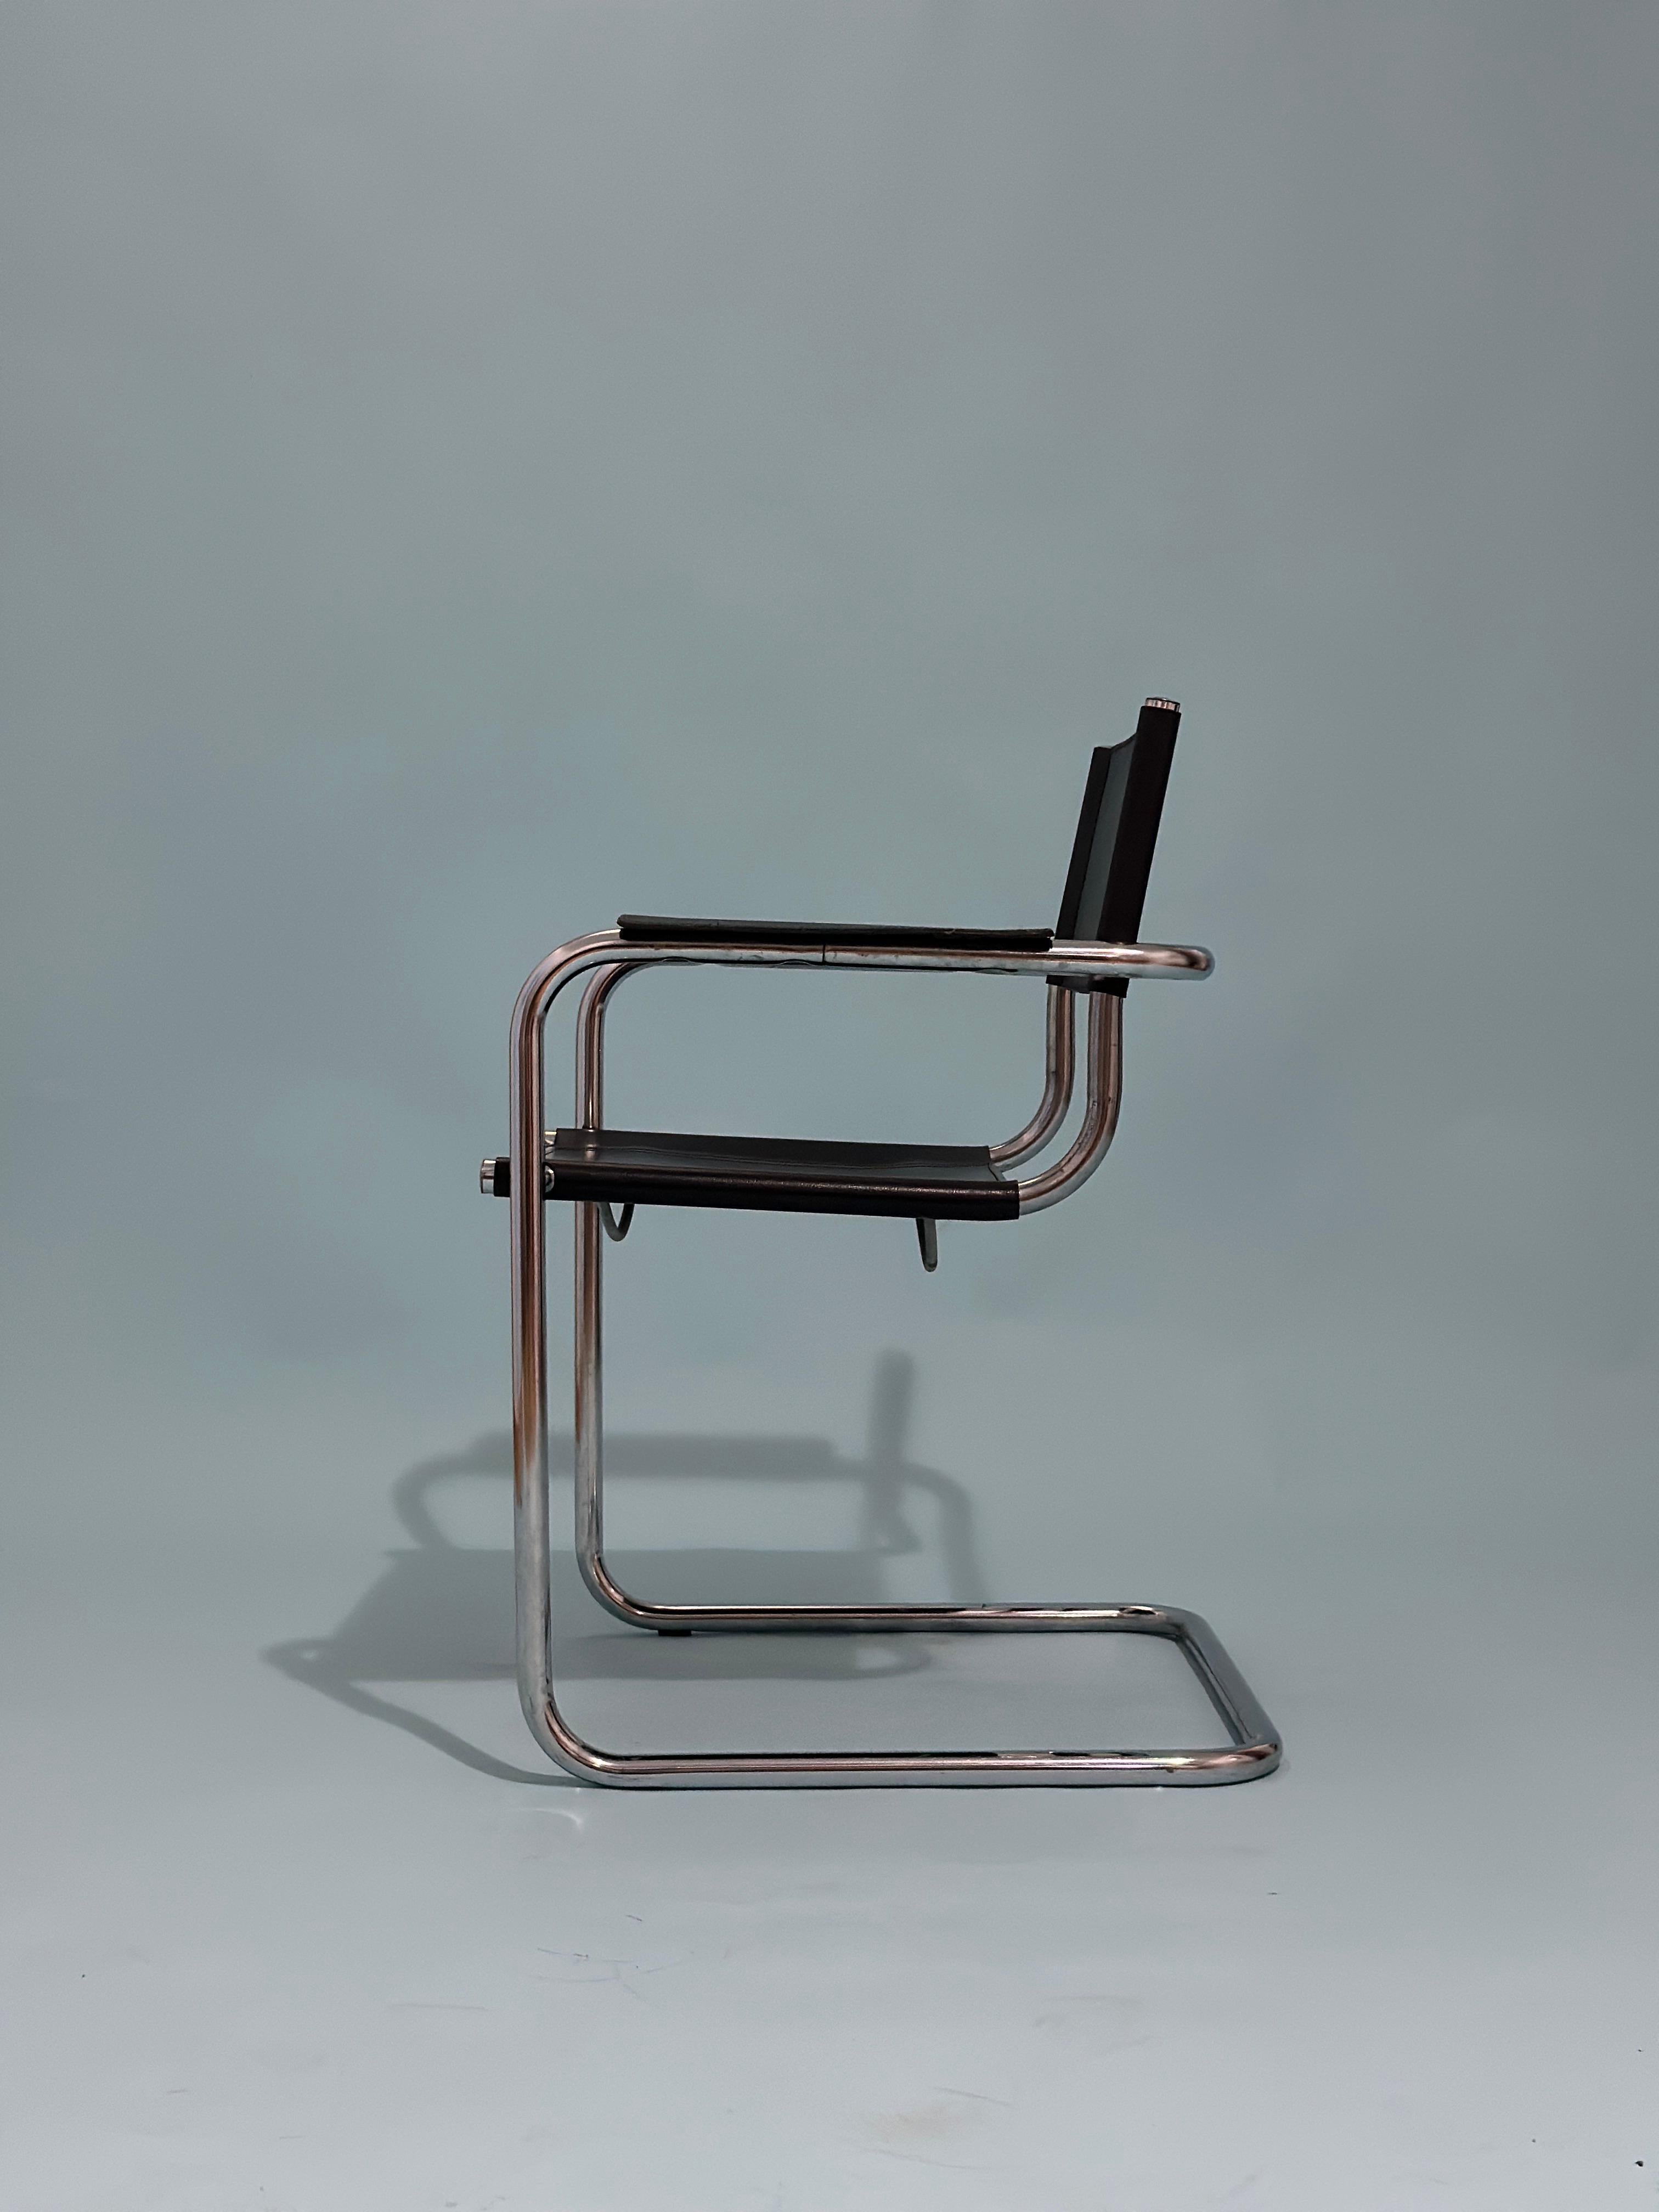 Italian Mart Stam Canrilever Chairs Italy 1980s For Sale